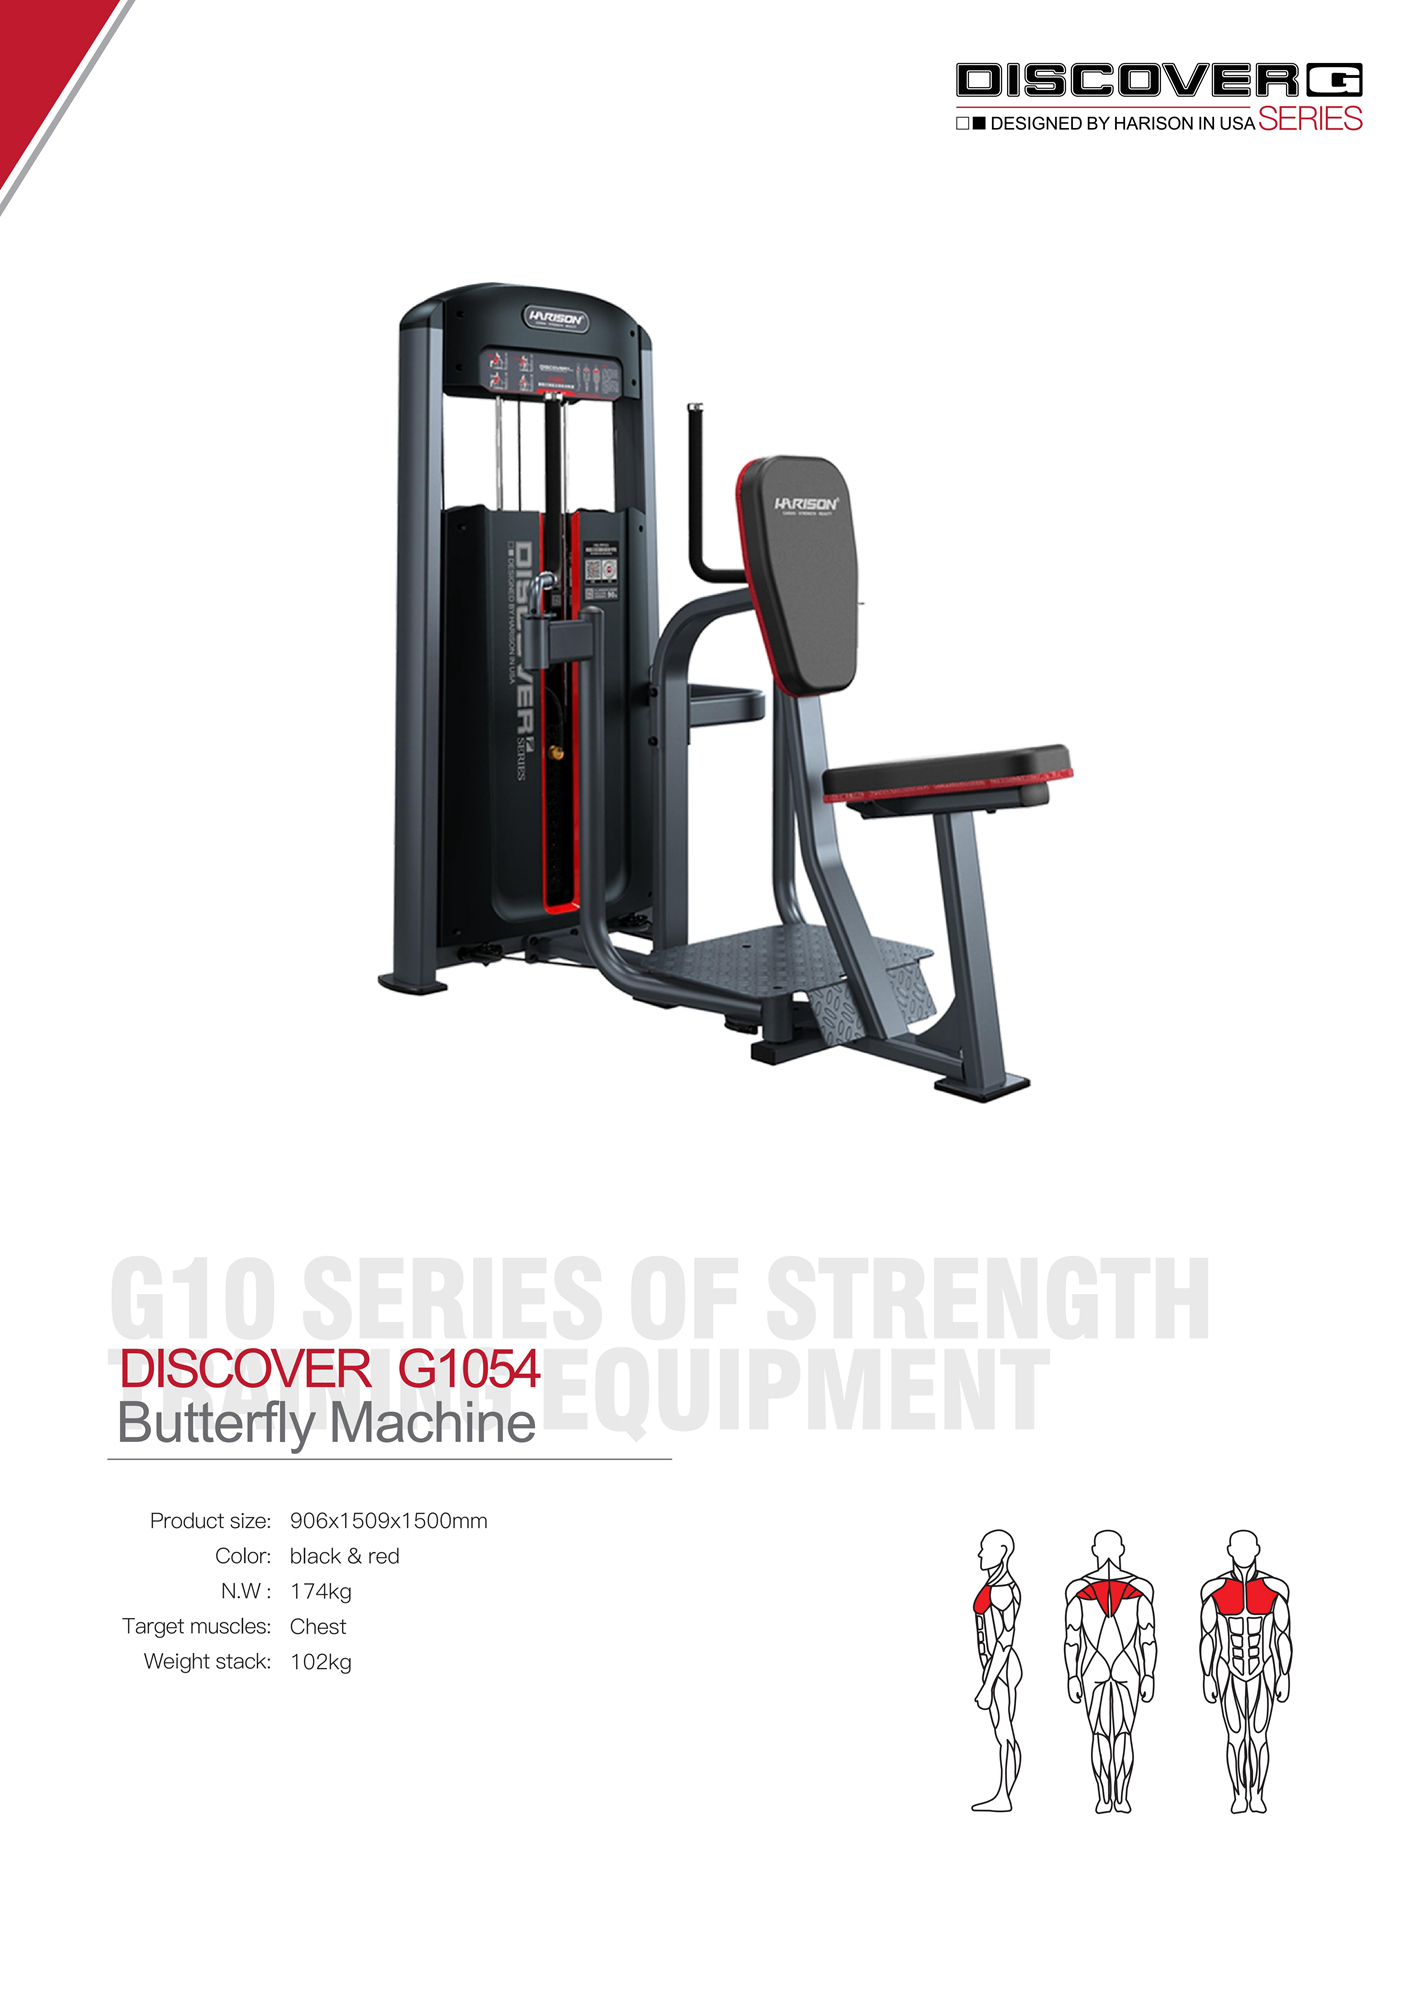 DISCOVER G1054 Butterfly Machine